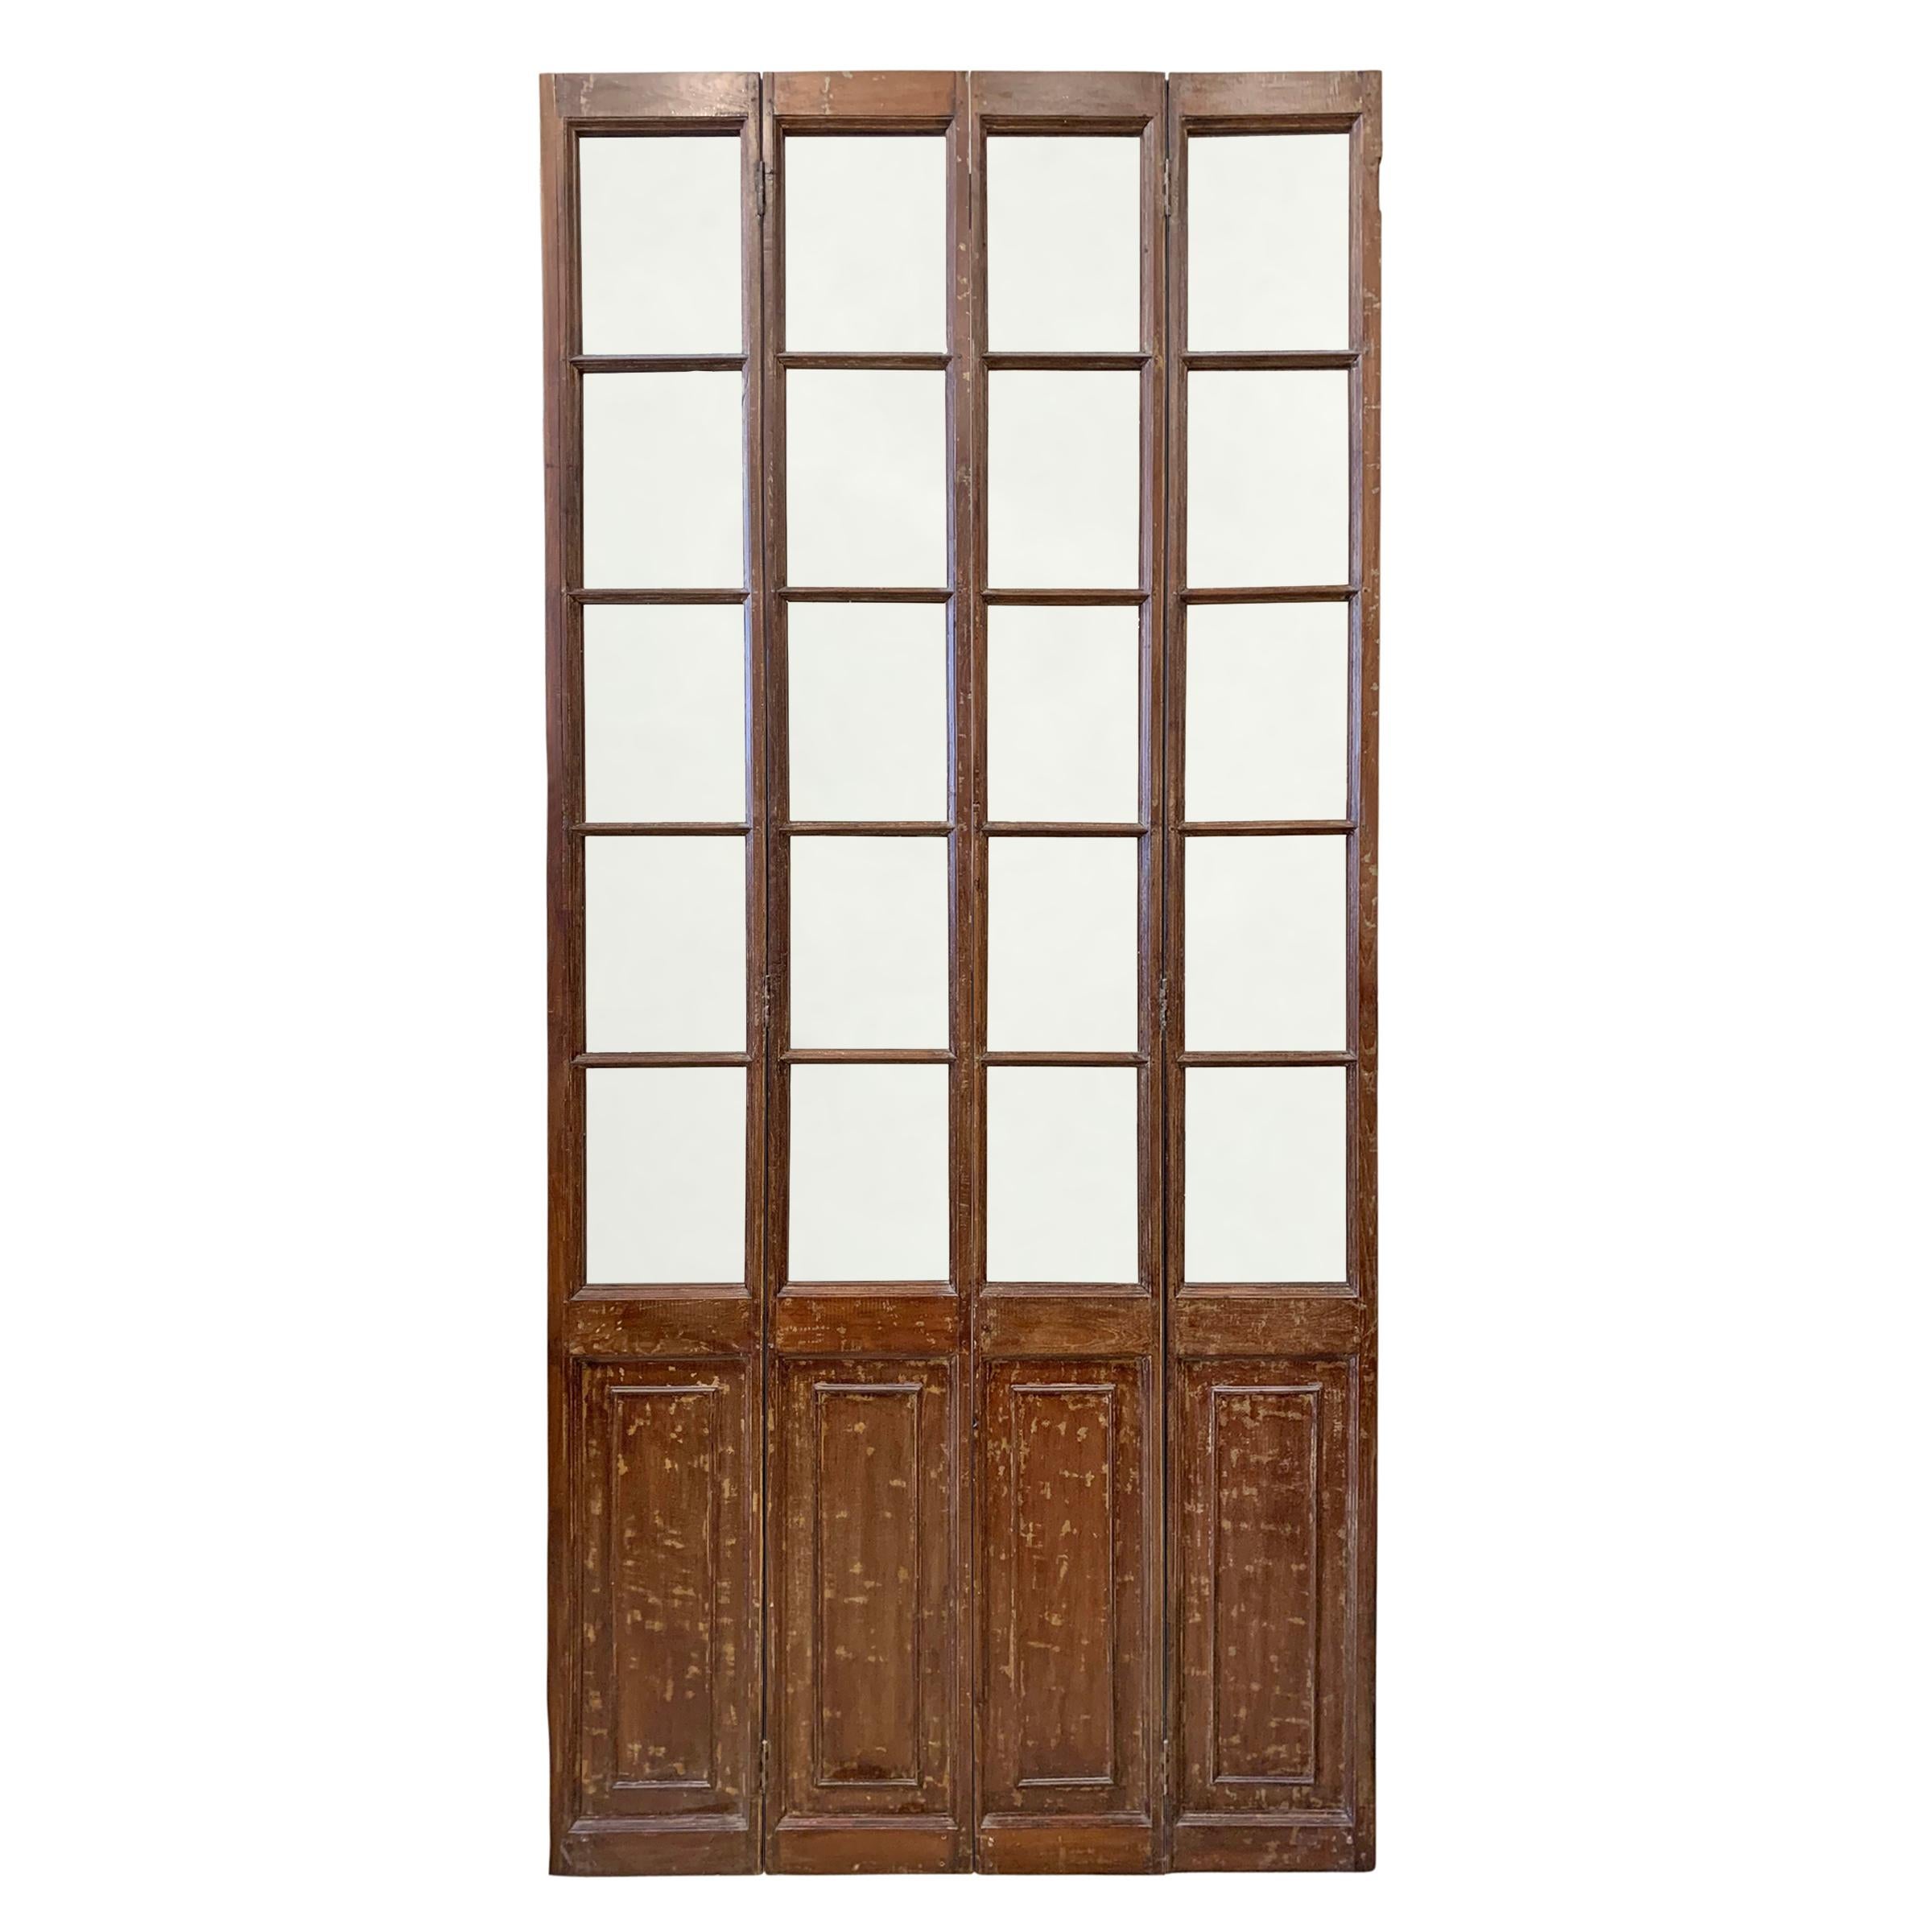 Early 20th Century Chinese Four-Panel Room Divider In Good Condition For Sale In Chicago, IL